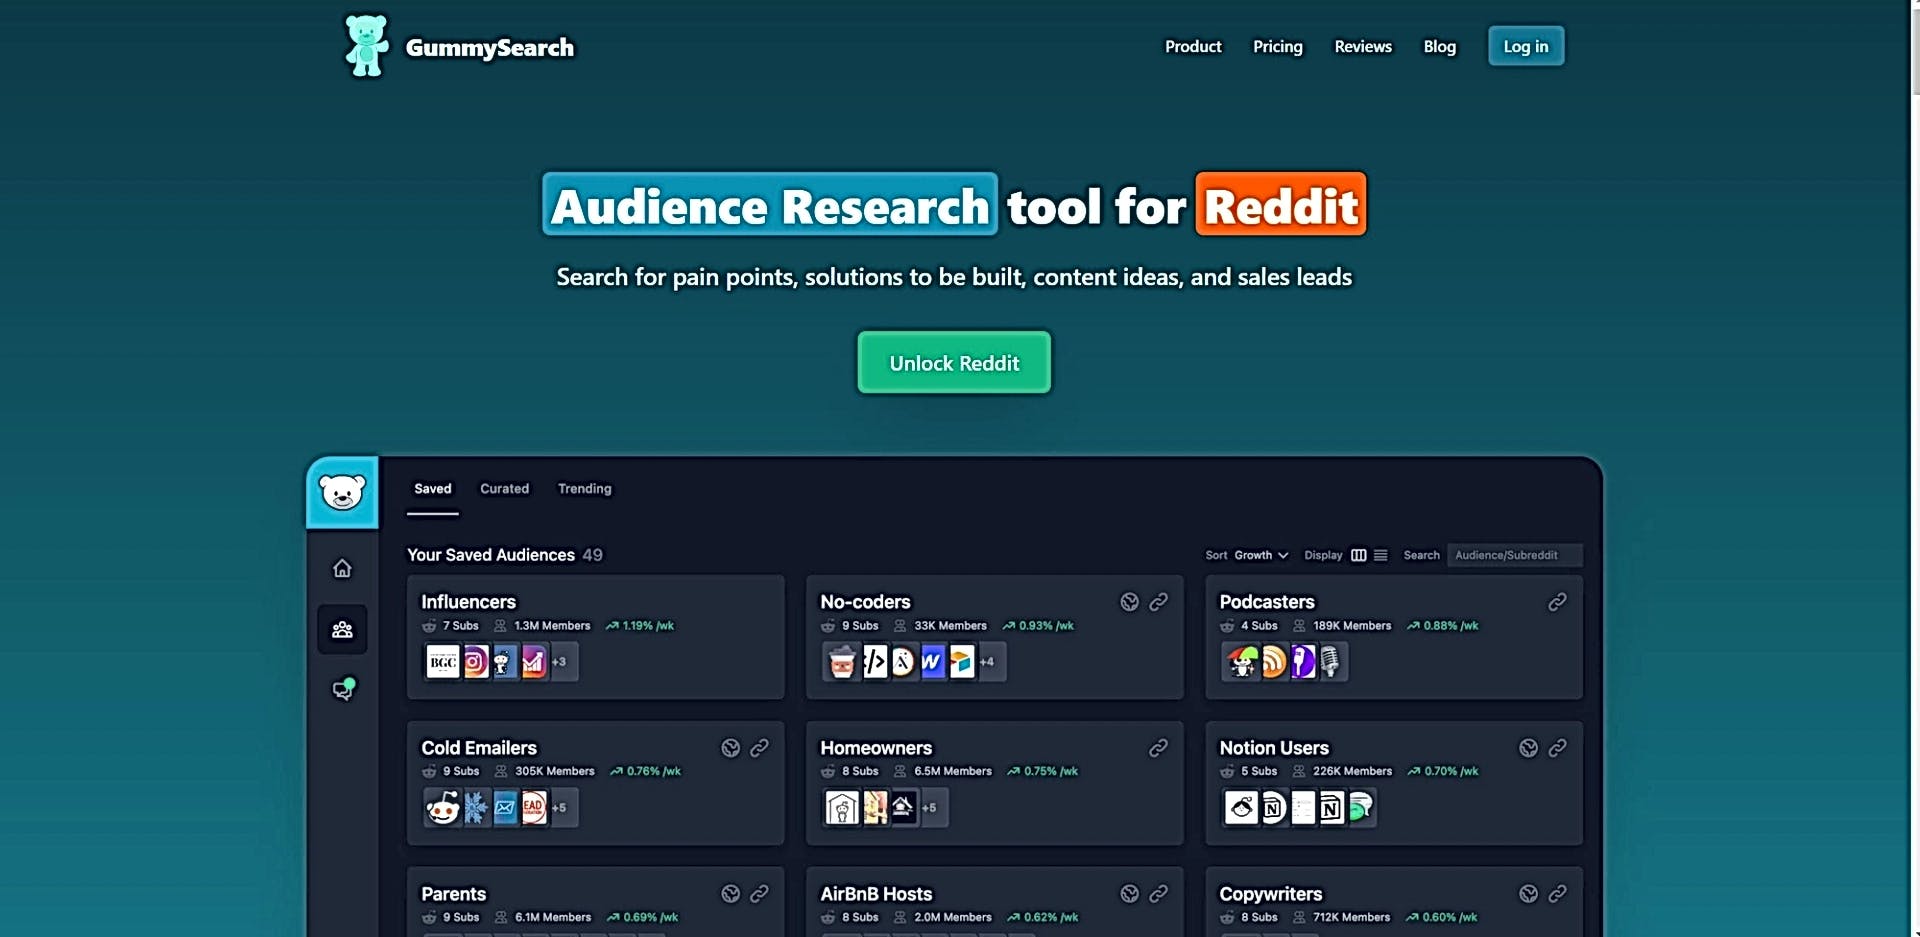 GummySearch featured